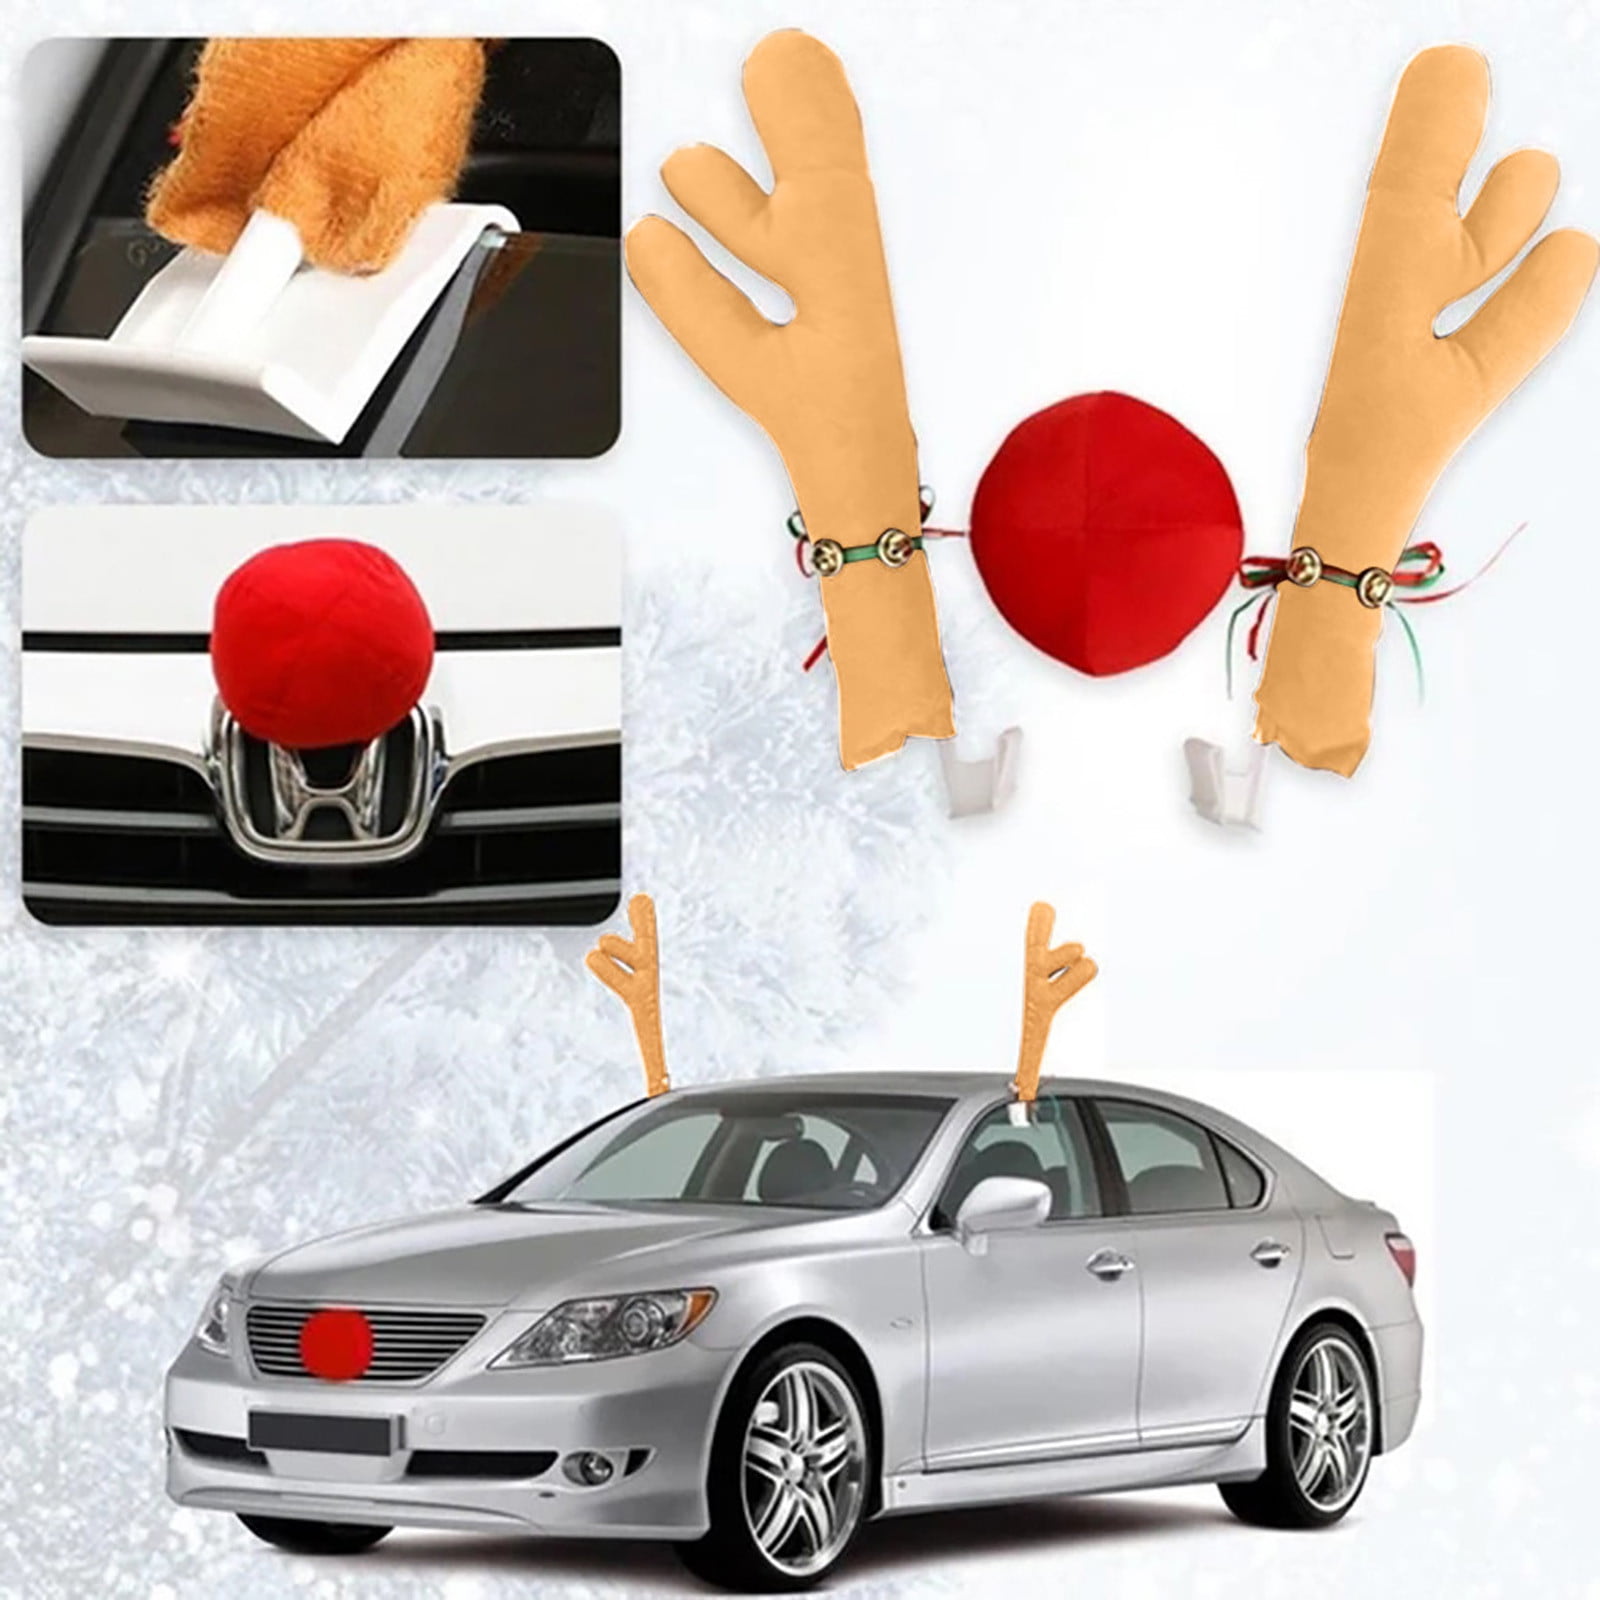 RUDOLPH THE RED NOSE REINDEER CAR DECORATION SET ANTLERS Car Costume 